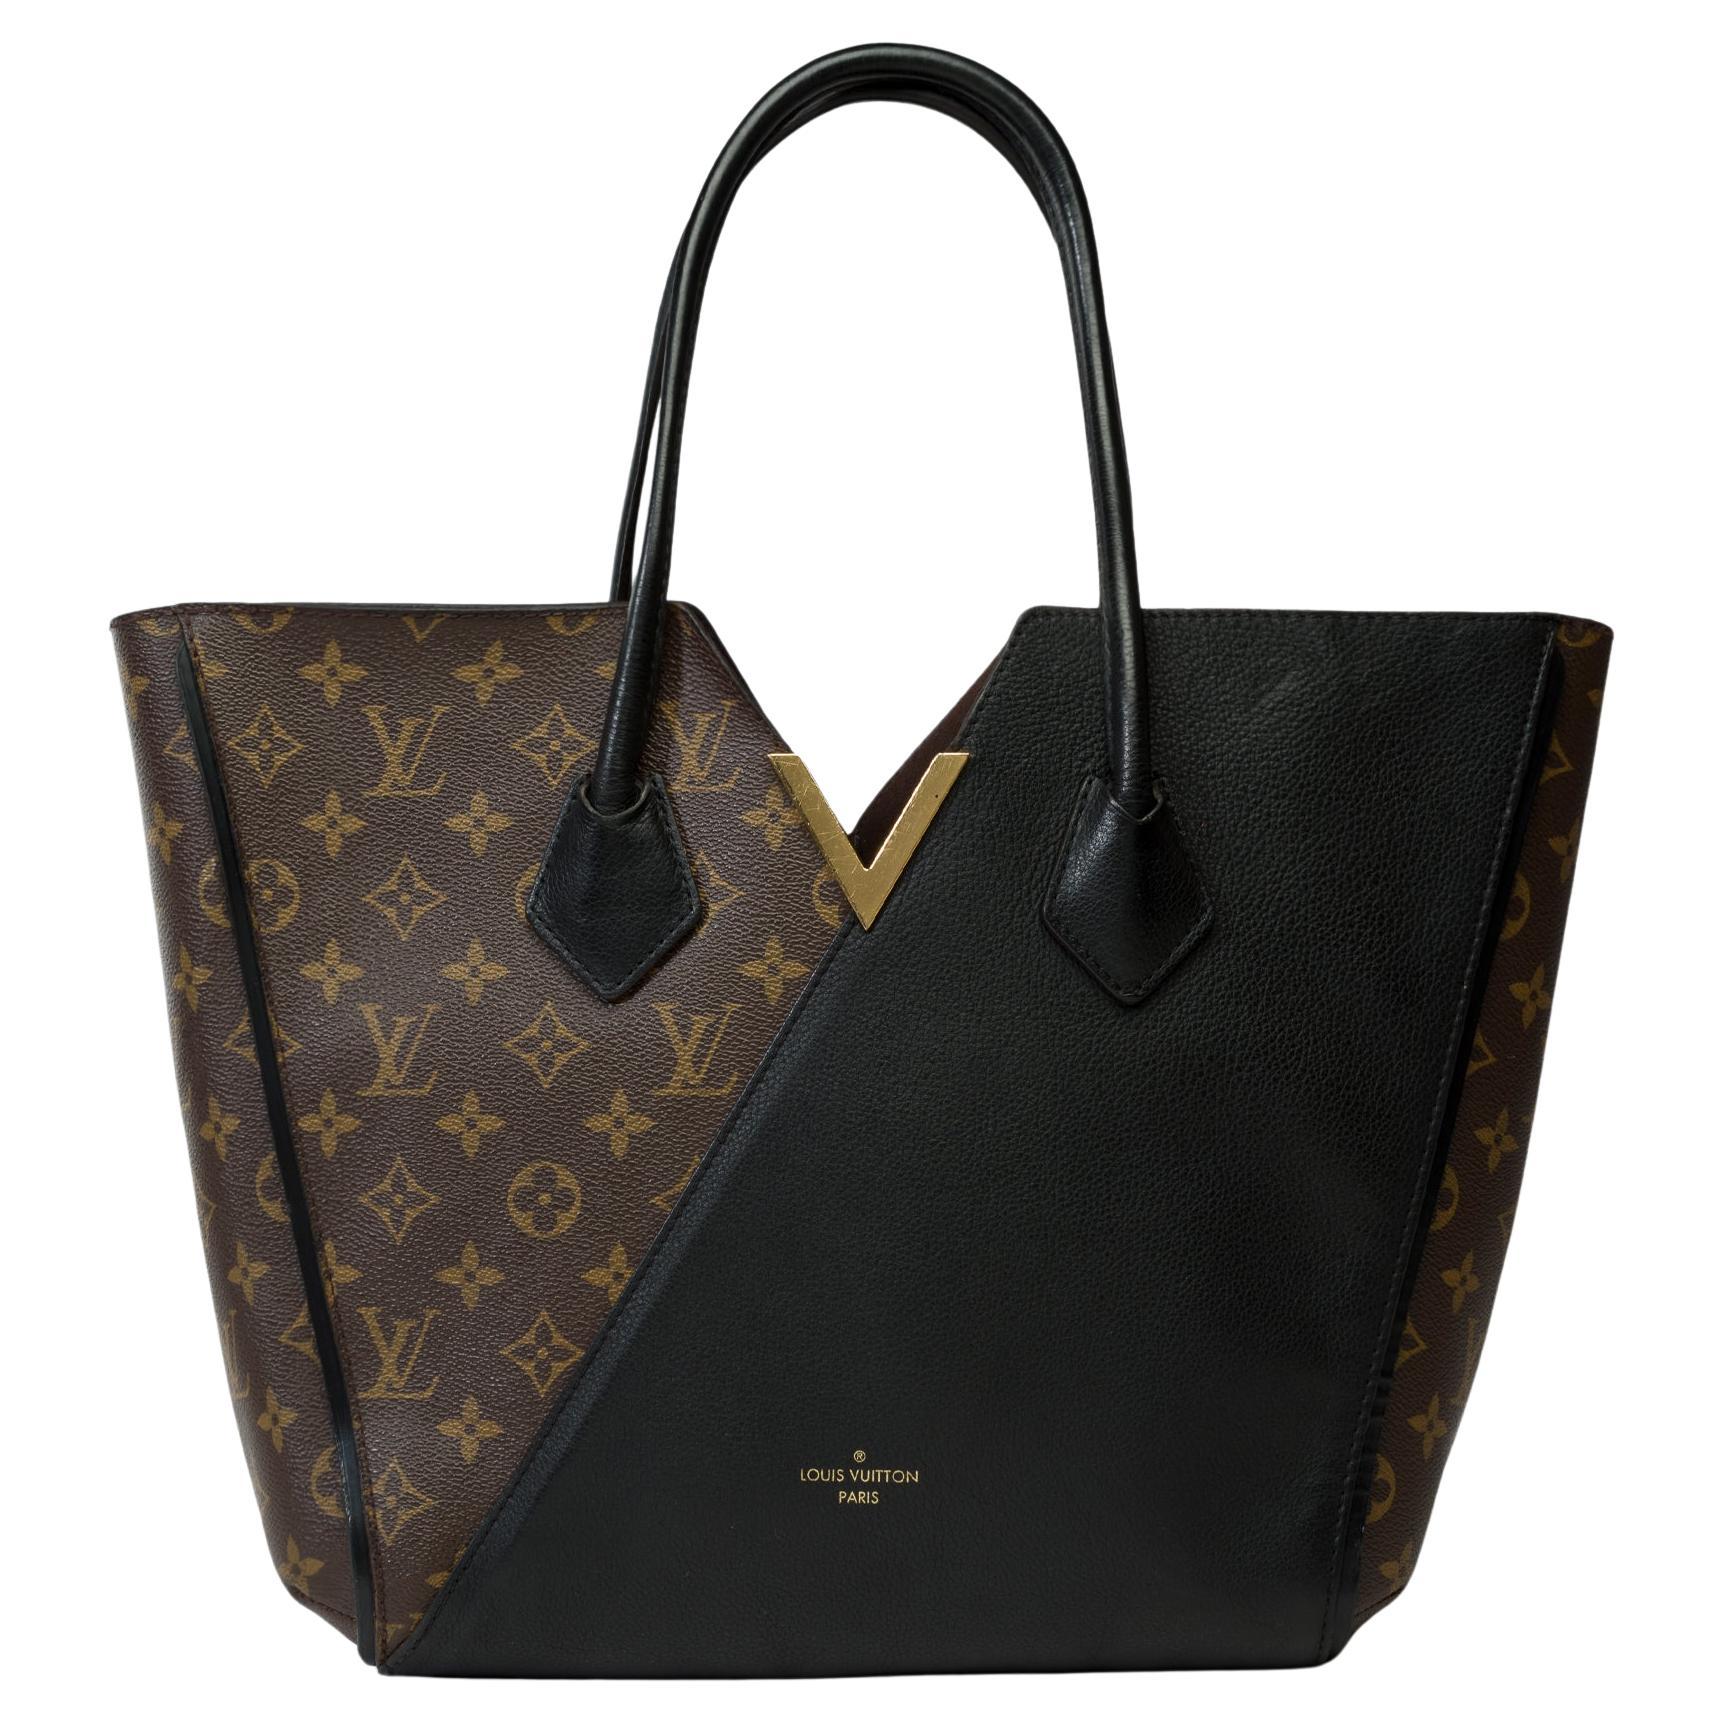 Louis Vuitton Kimono Tote bag in brown monogram canvas and black leather, GHW For Sale